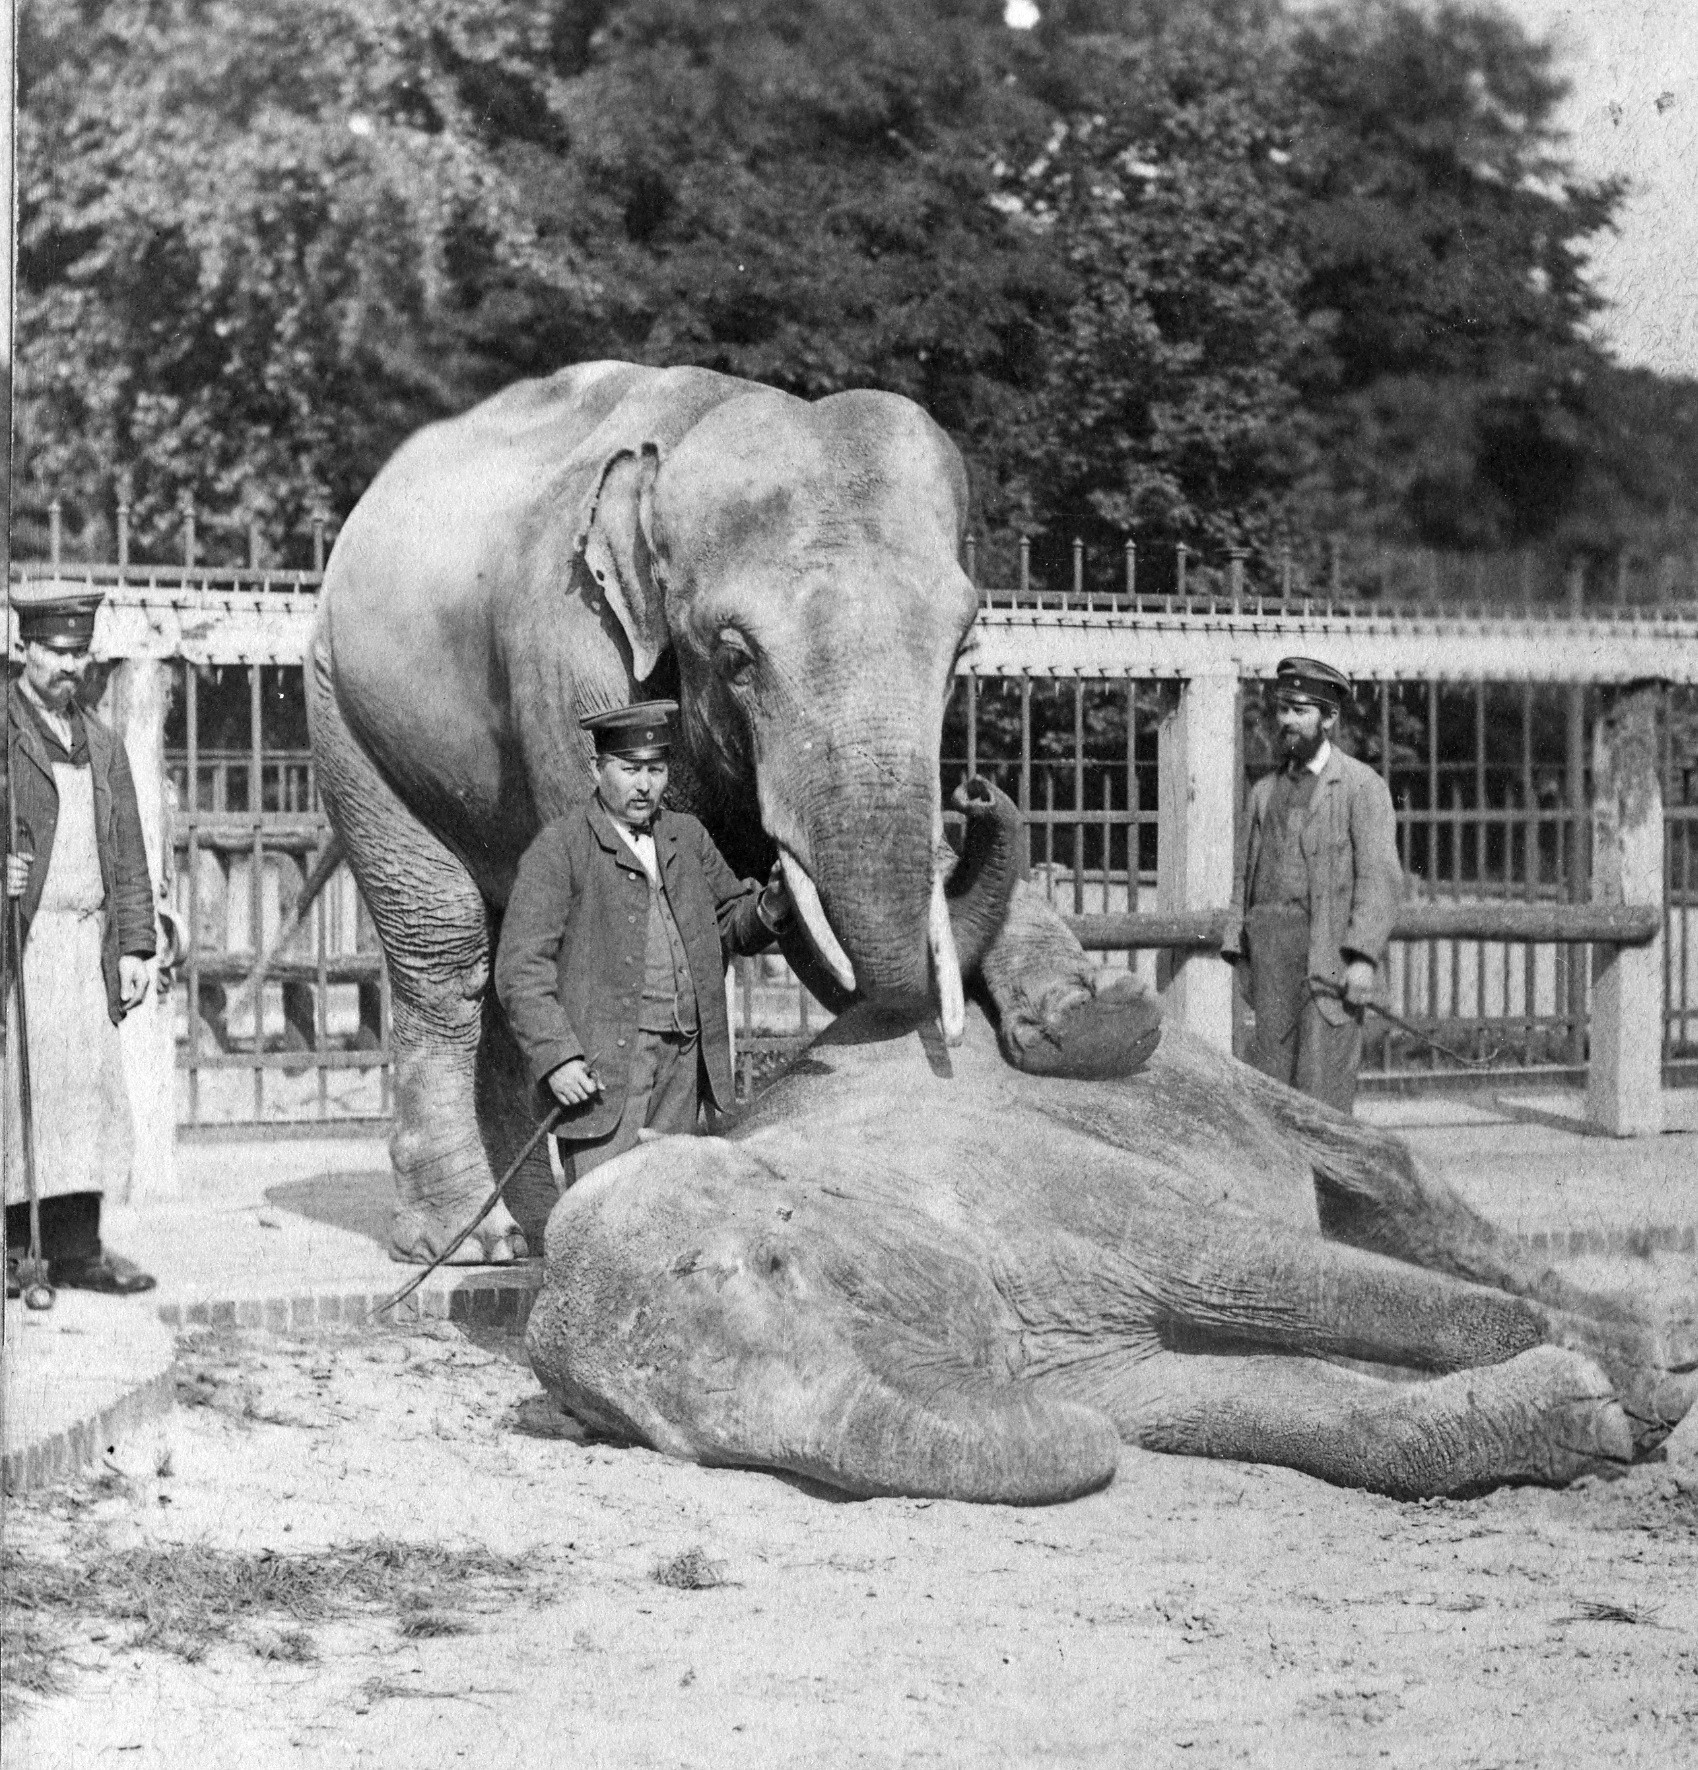 Black and white photograph: Two elephants and three caretakers in peaked caps in front of a high fence